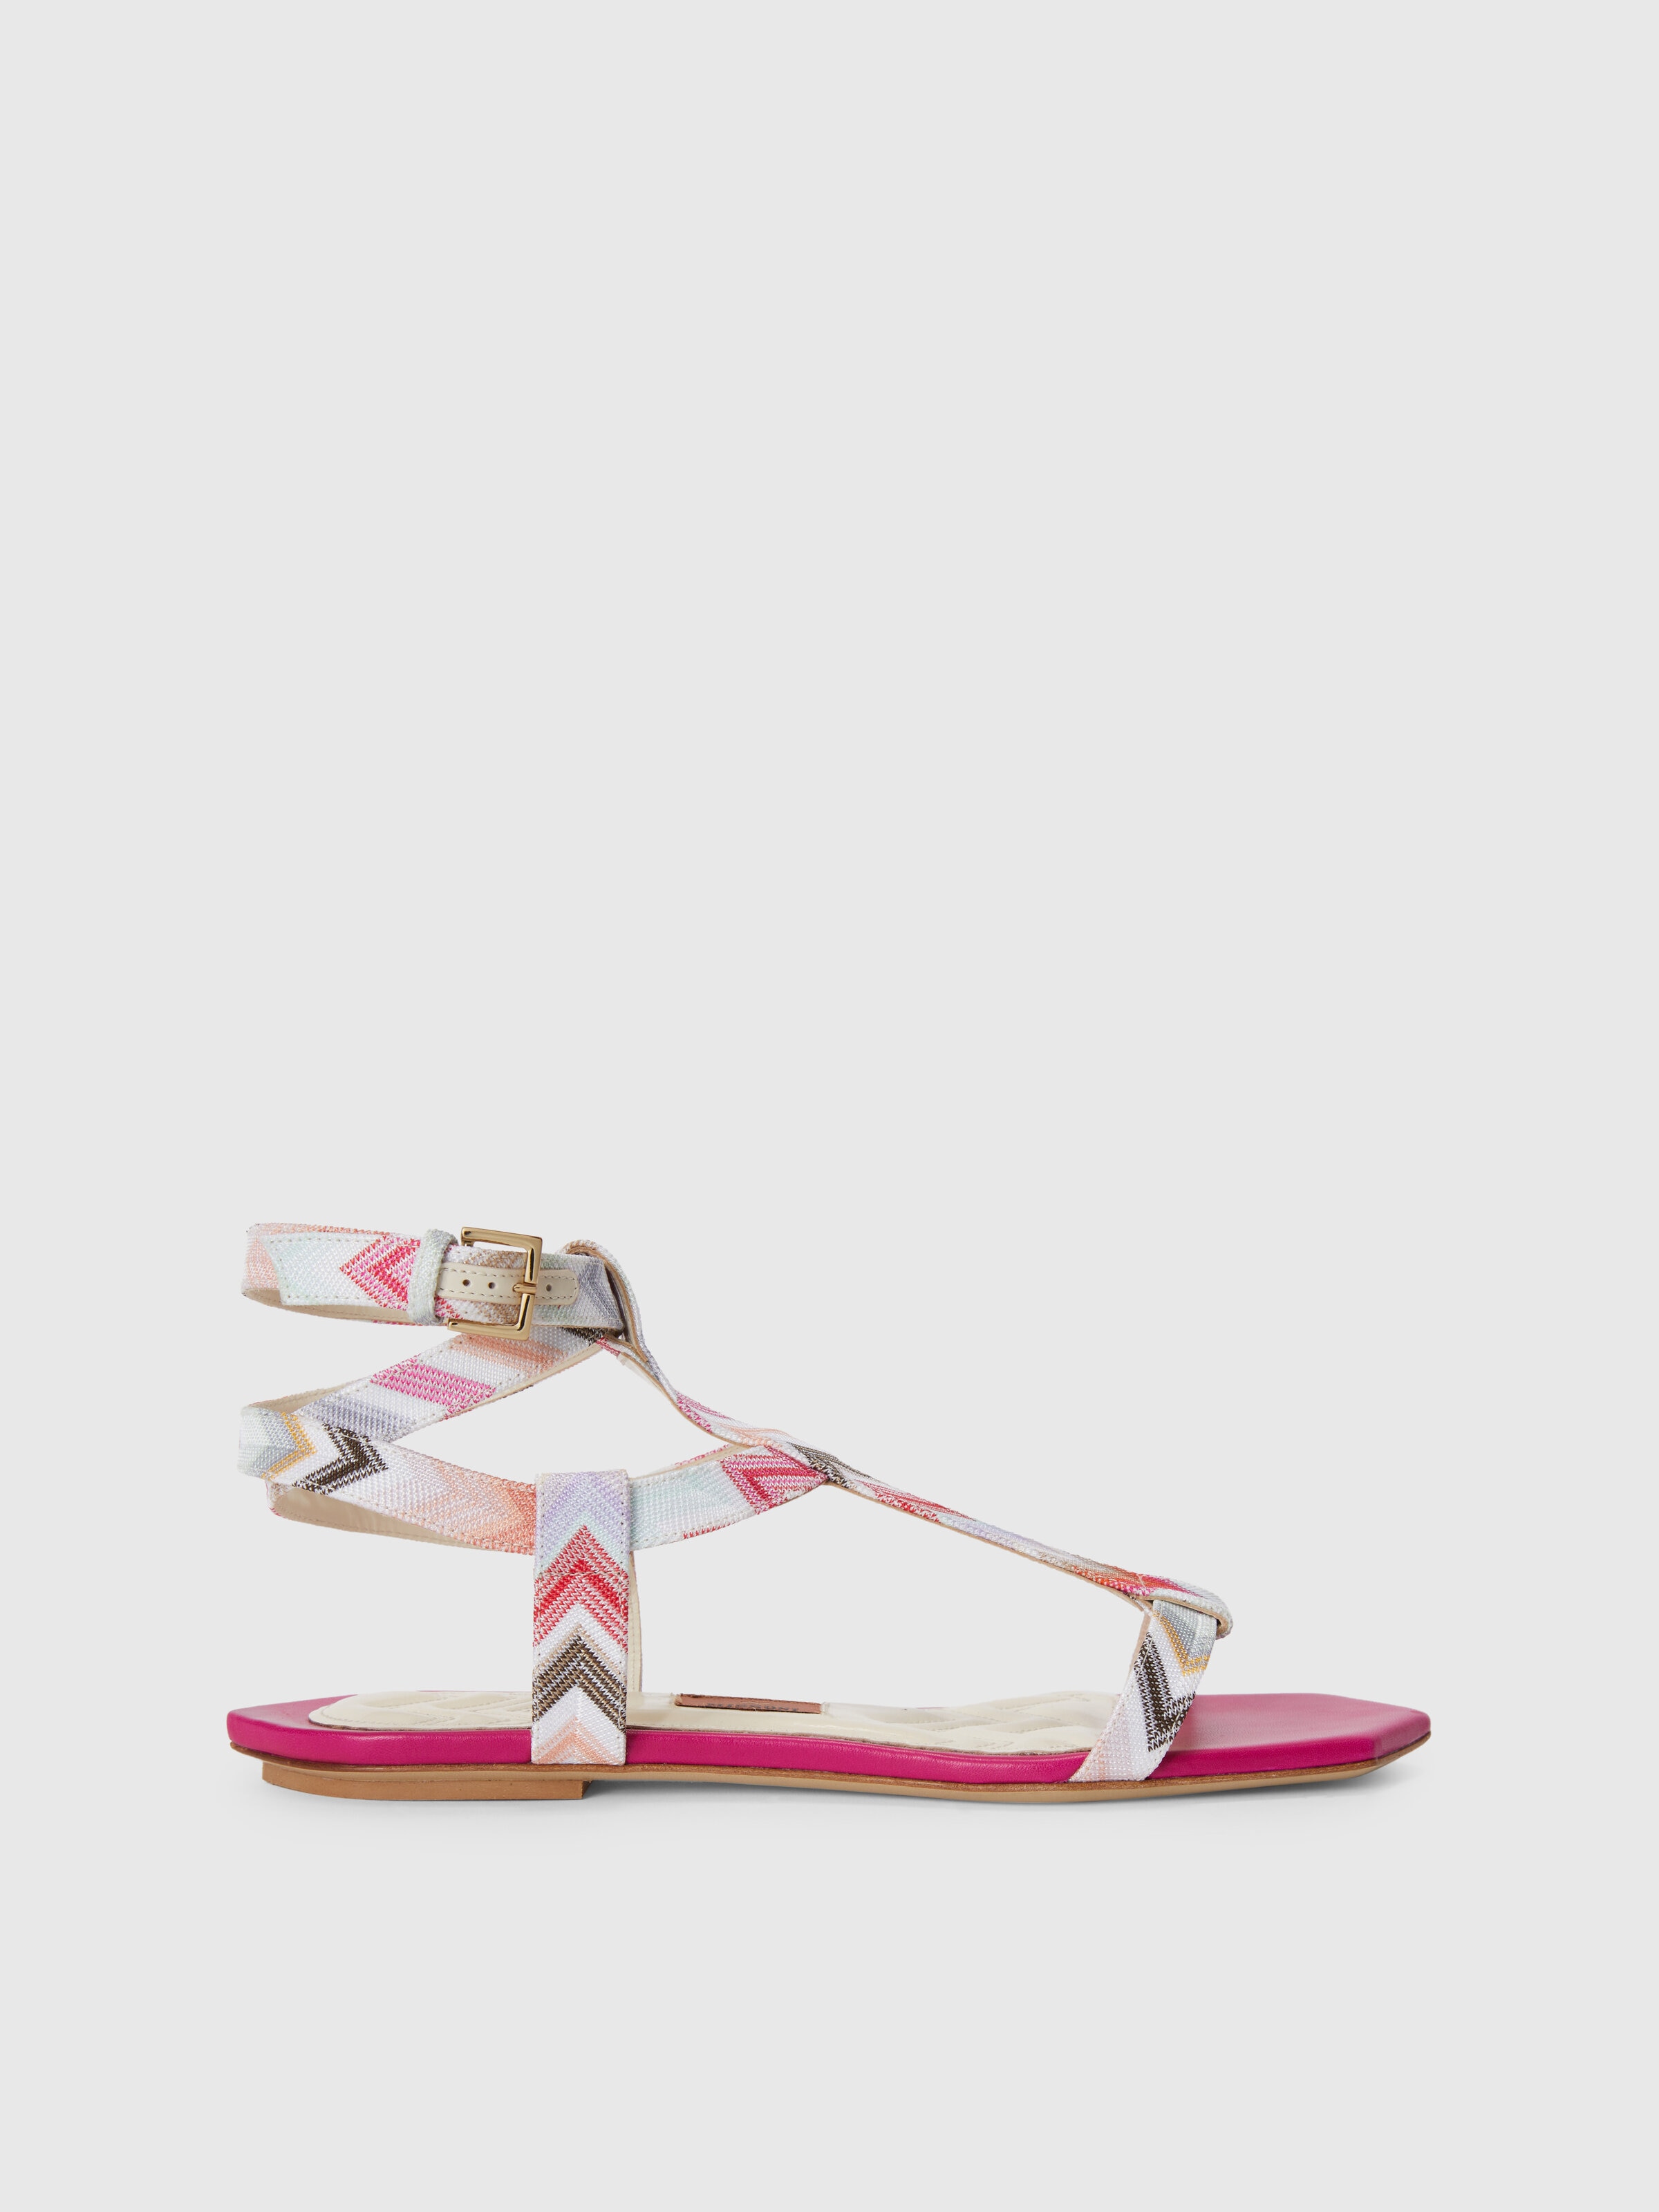 Low sandals in zigzag fabric, Pink   - 0